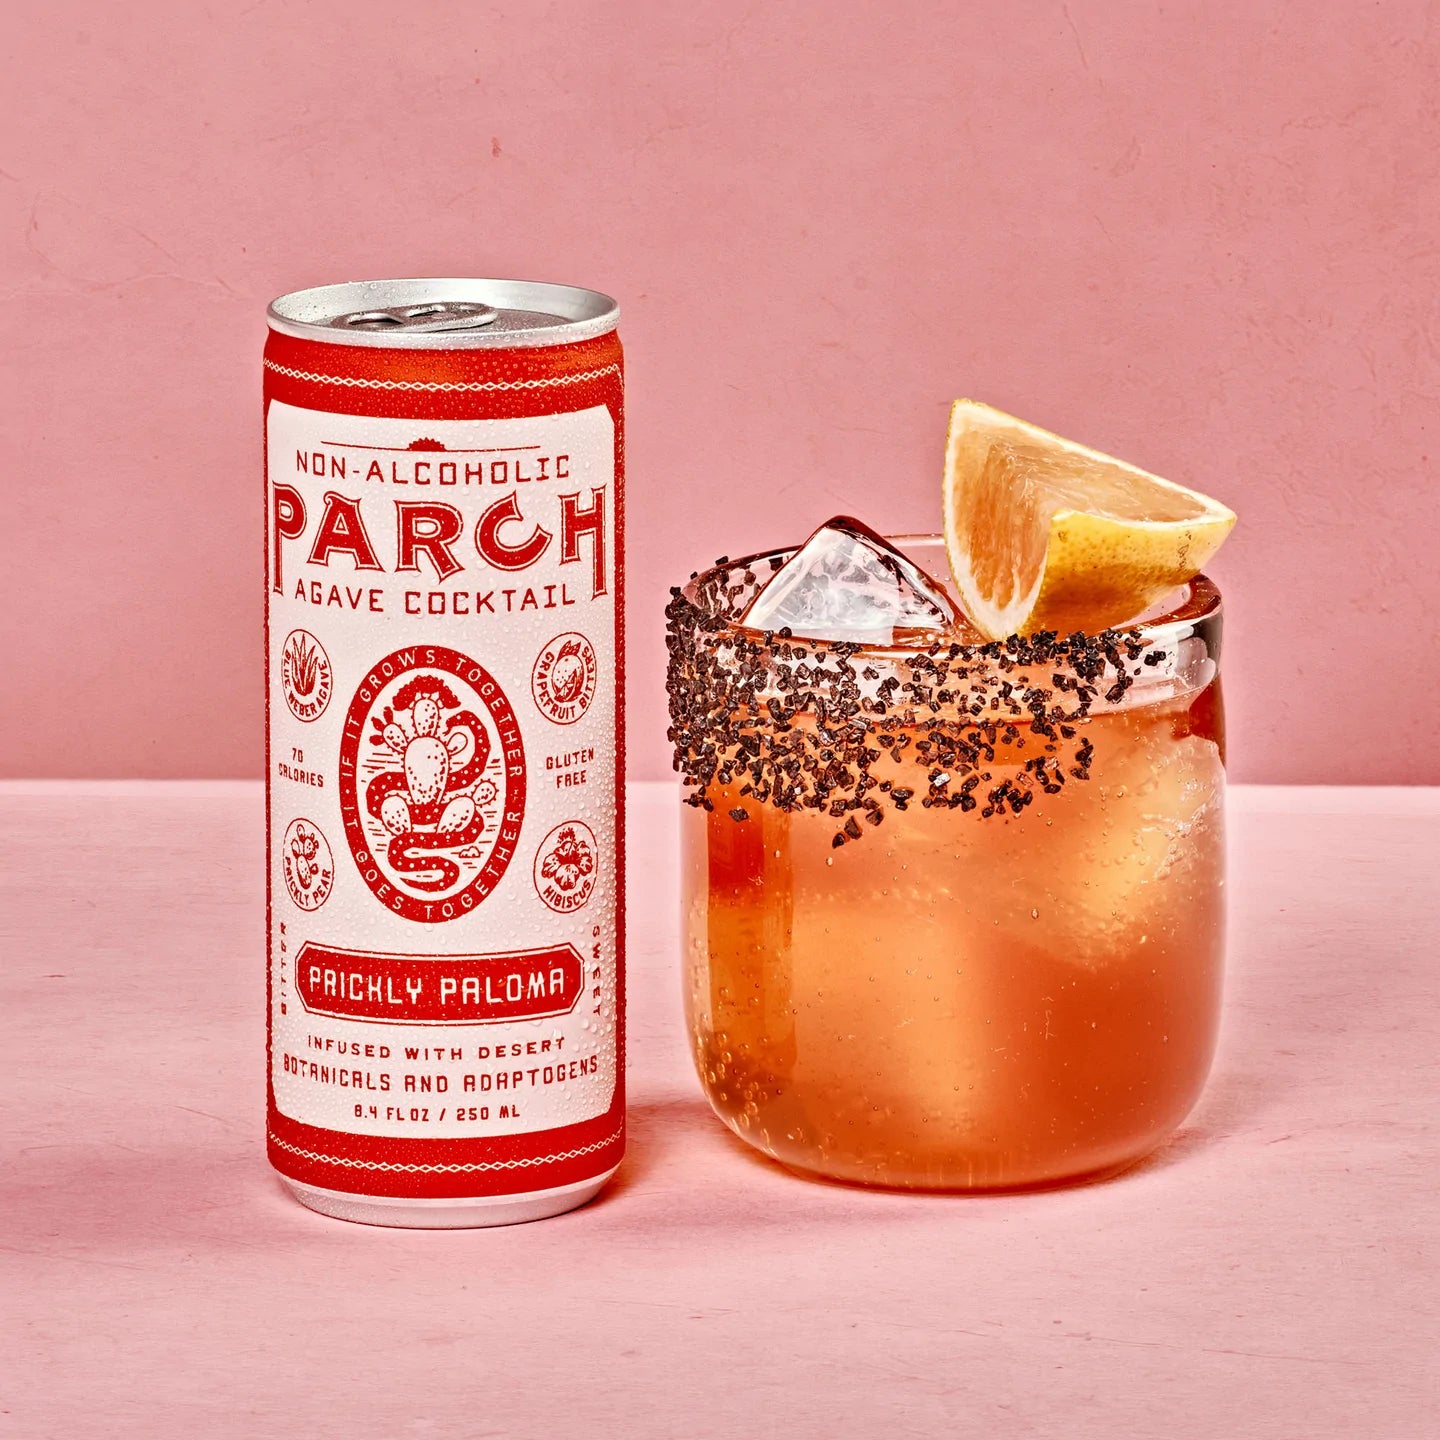 Parch Prickly Paloma Non-Alcoholic Agave Cocktail (4-pack) - zero-proof-shop